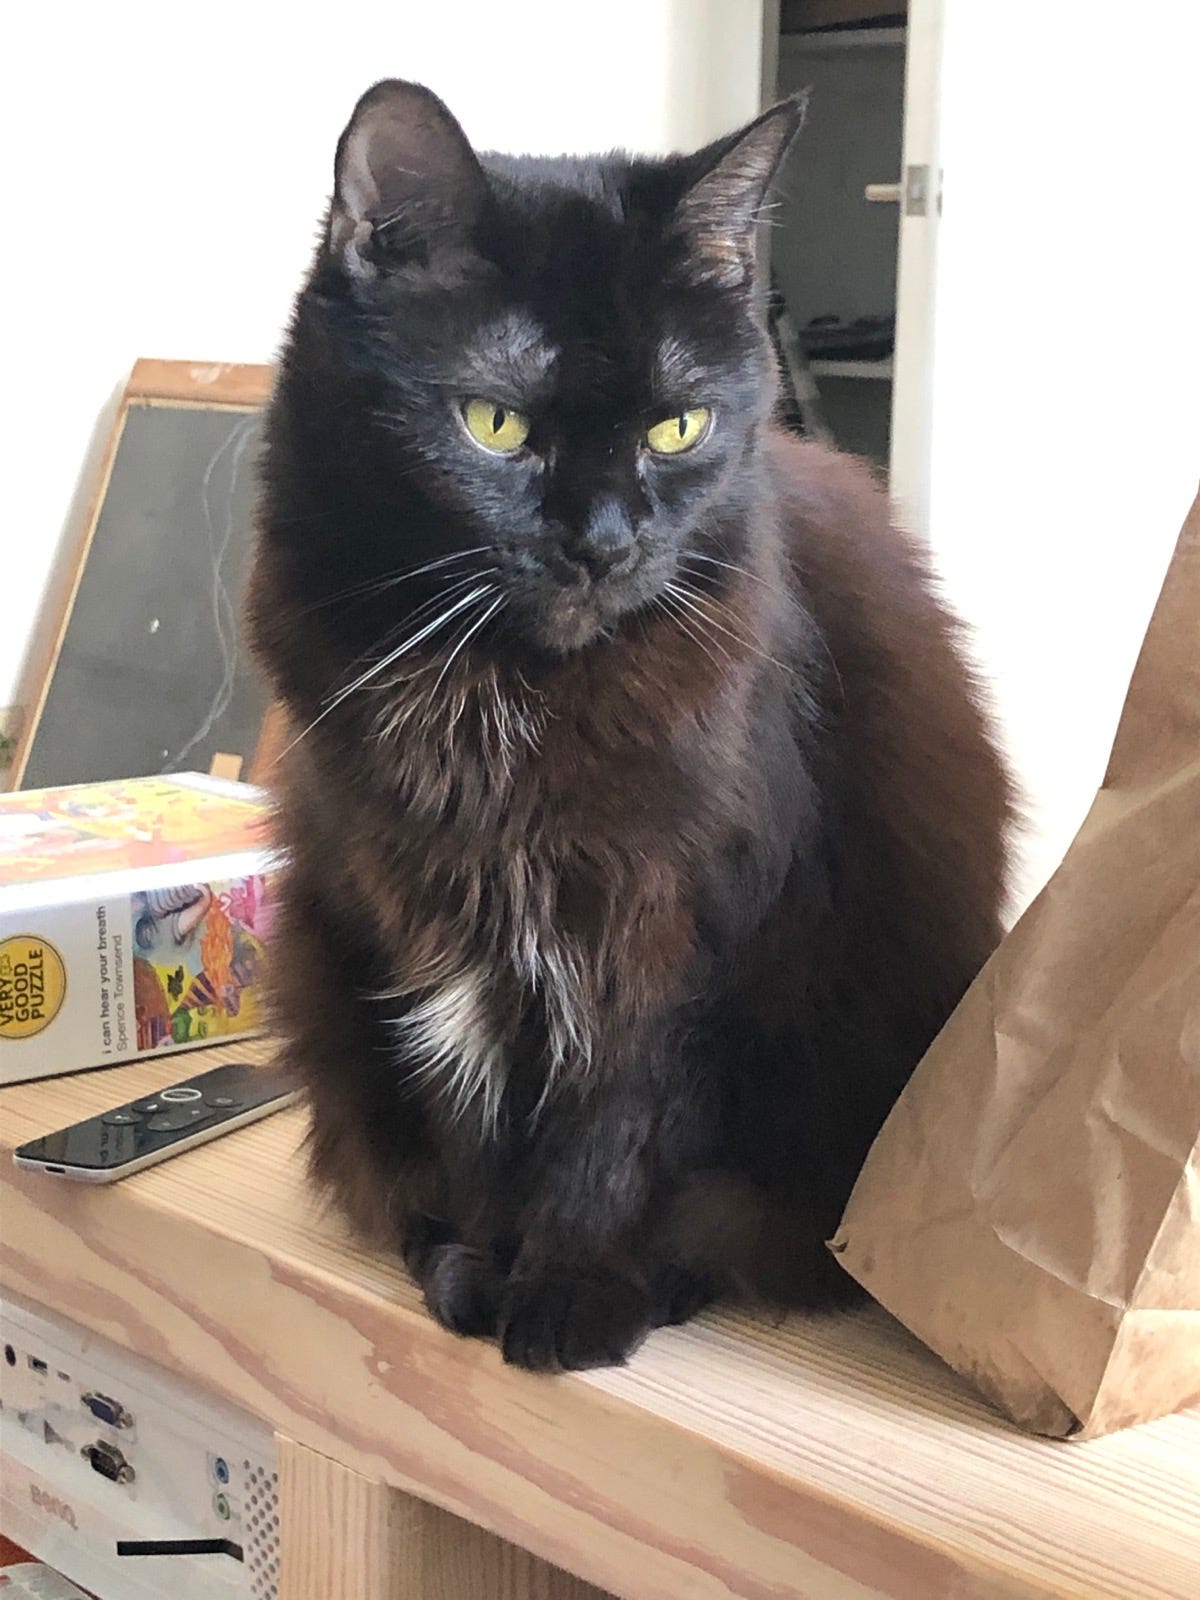 A black cat with piercing green eyes and a little bit of white on her legs sits on top of a wooden surface, with a puzzle on one side, and a paper bag on the other.